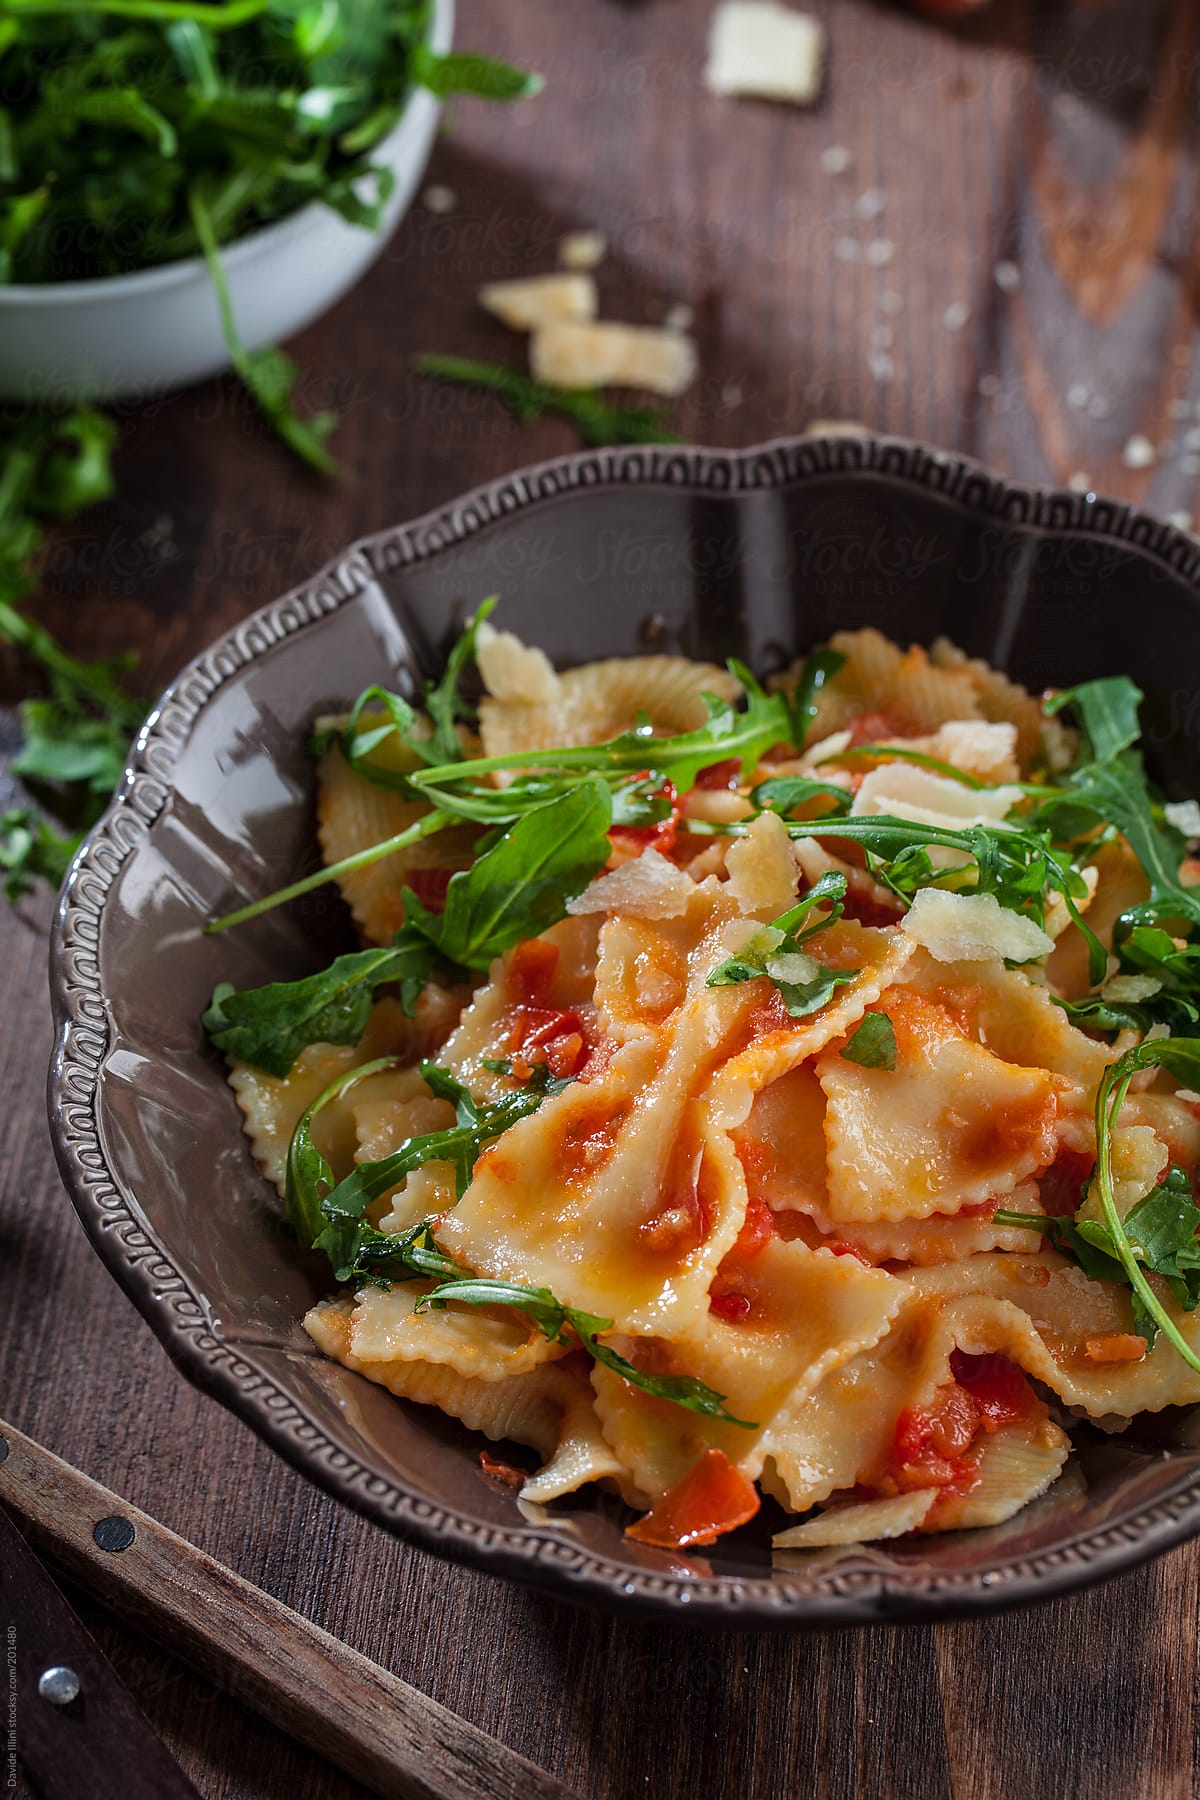 Pasta with tomato sauce and rocket salad